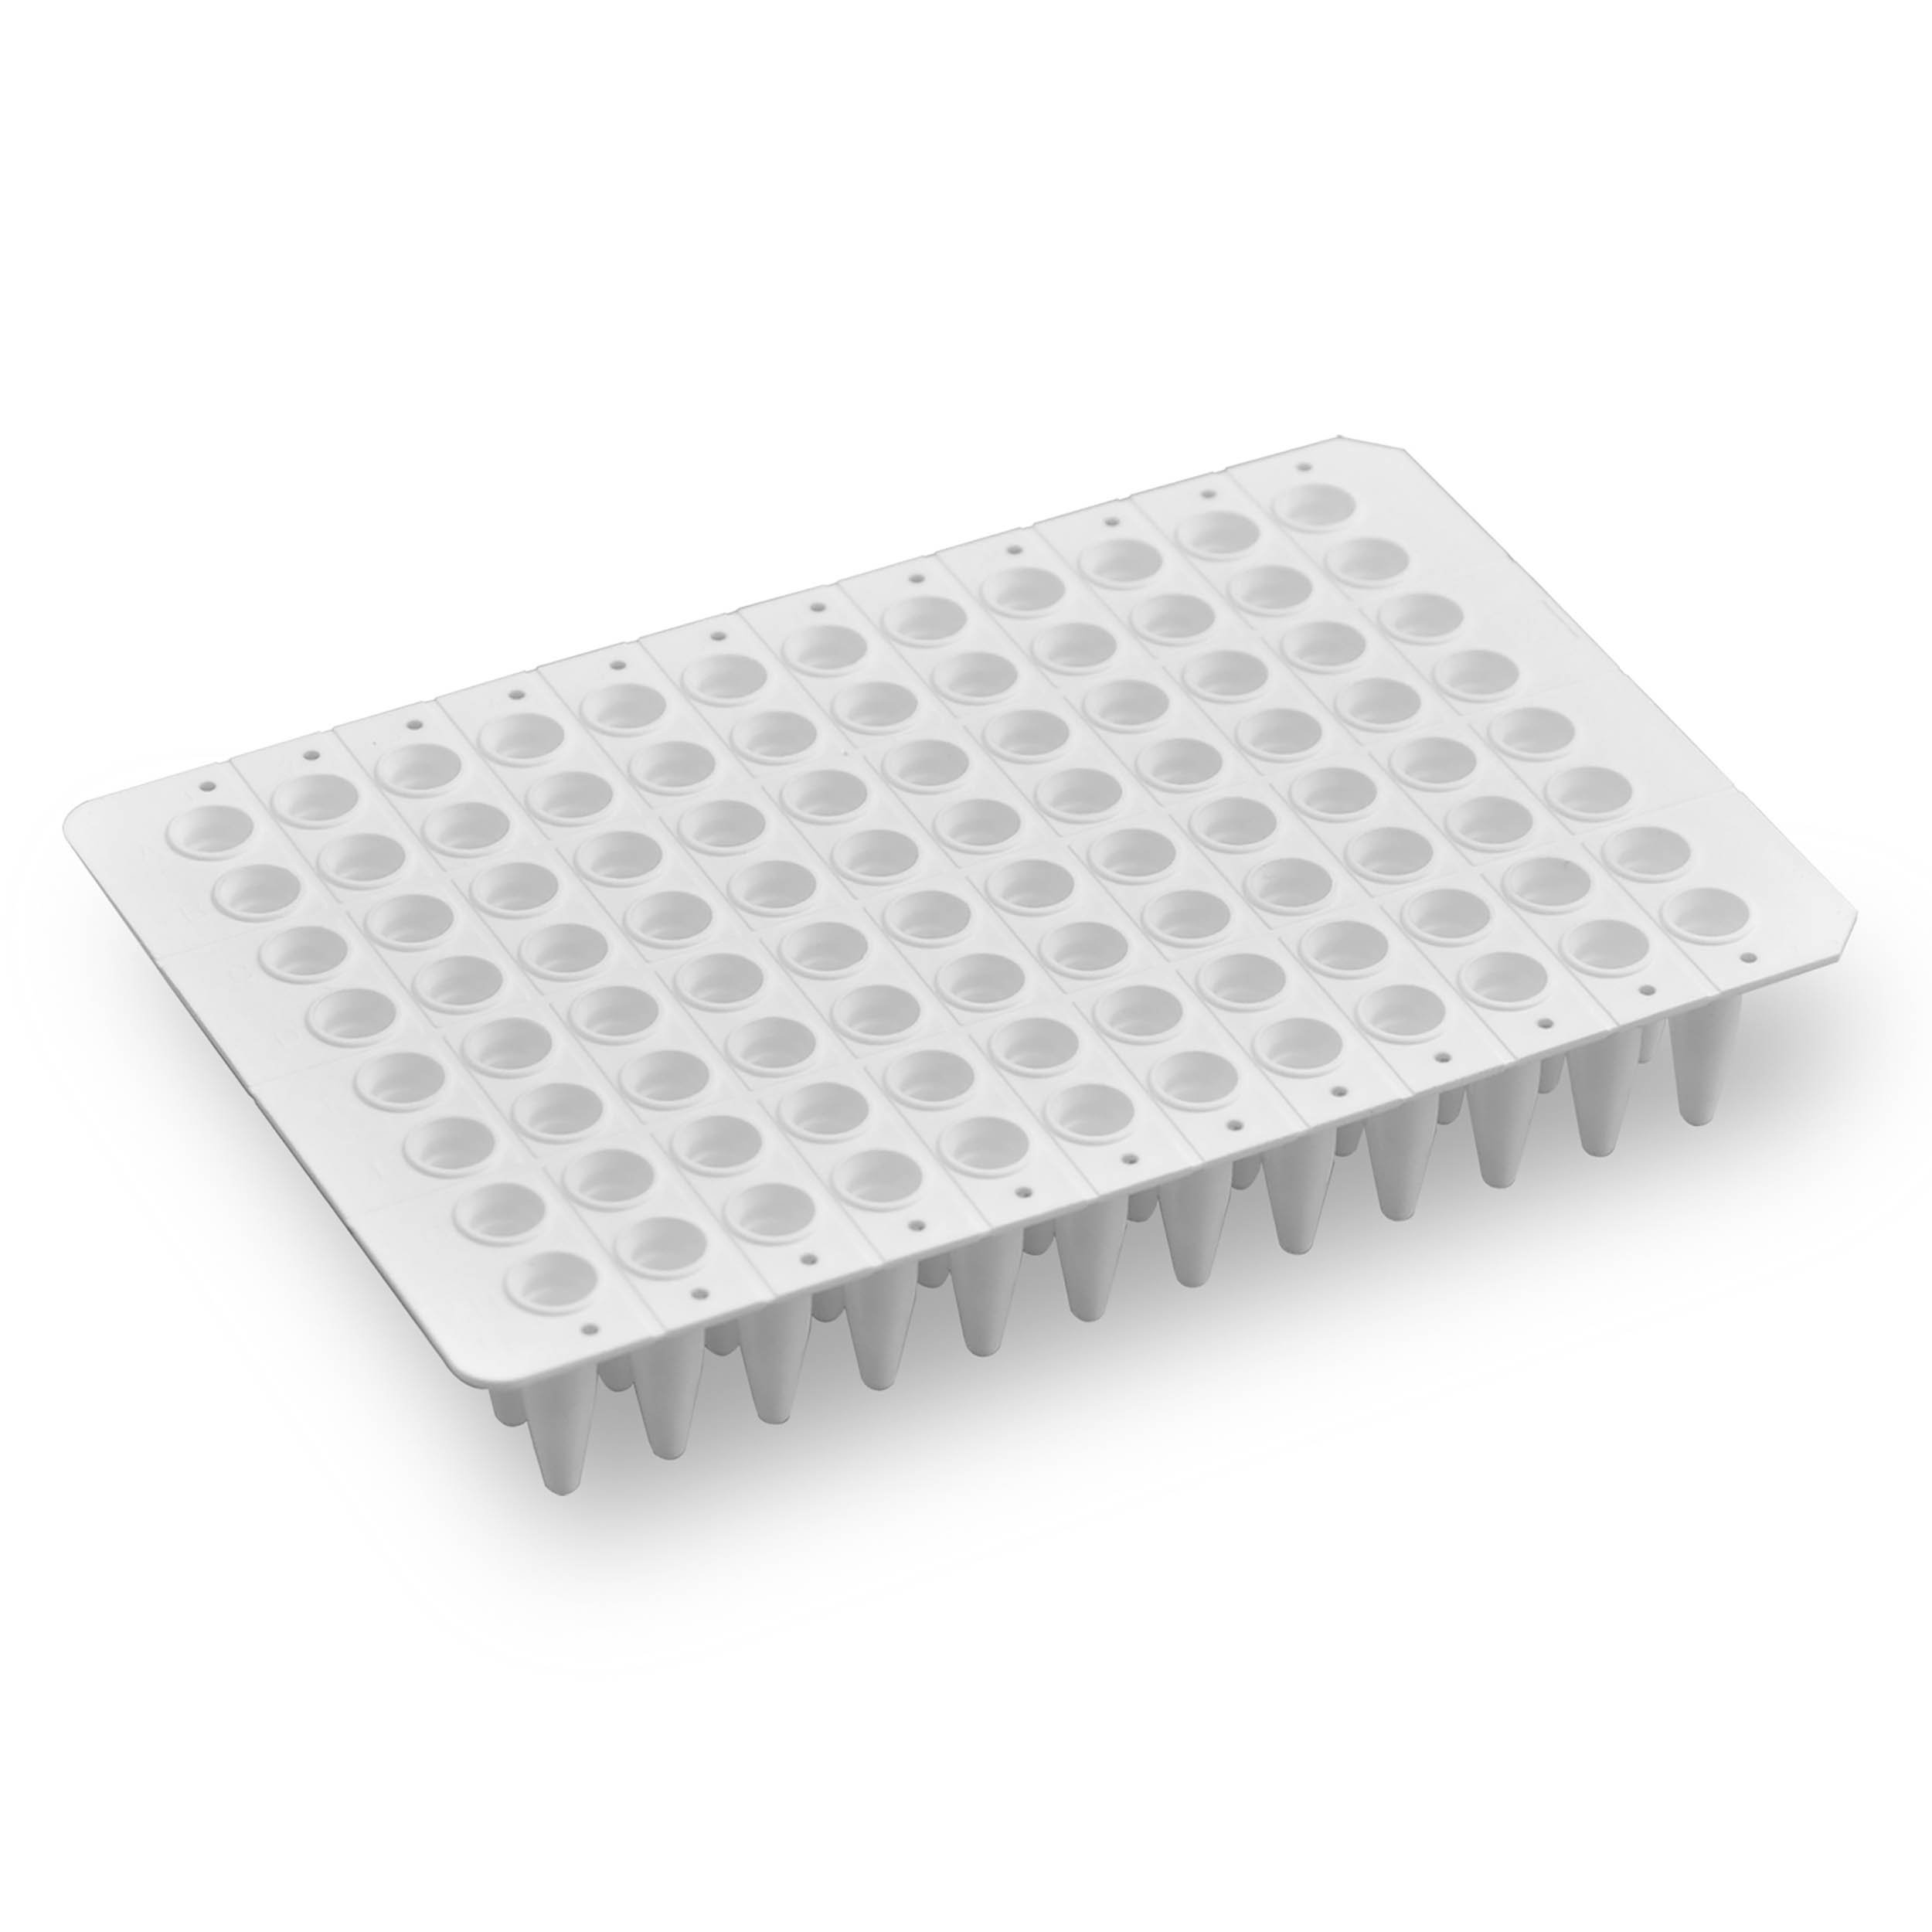 PureAmp 96-Well x 0.2mL PCR Plates - Non Skirted, White (10 Packs of 50 per Pack)